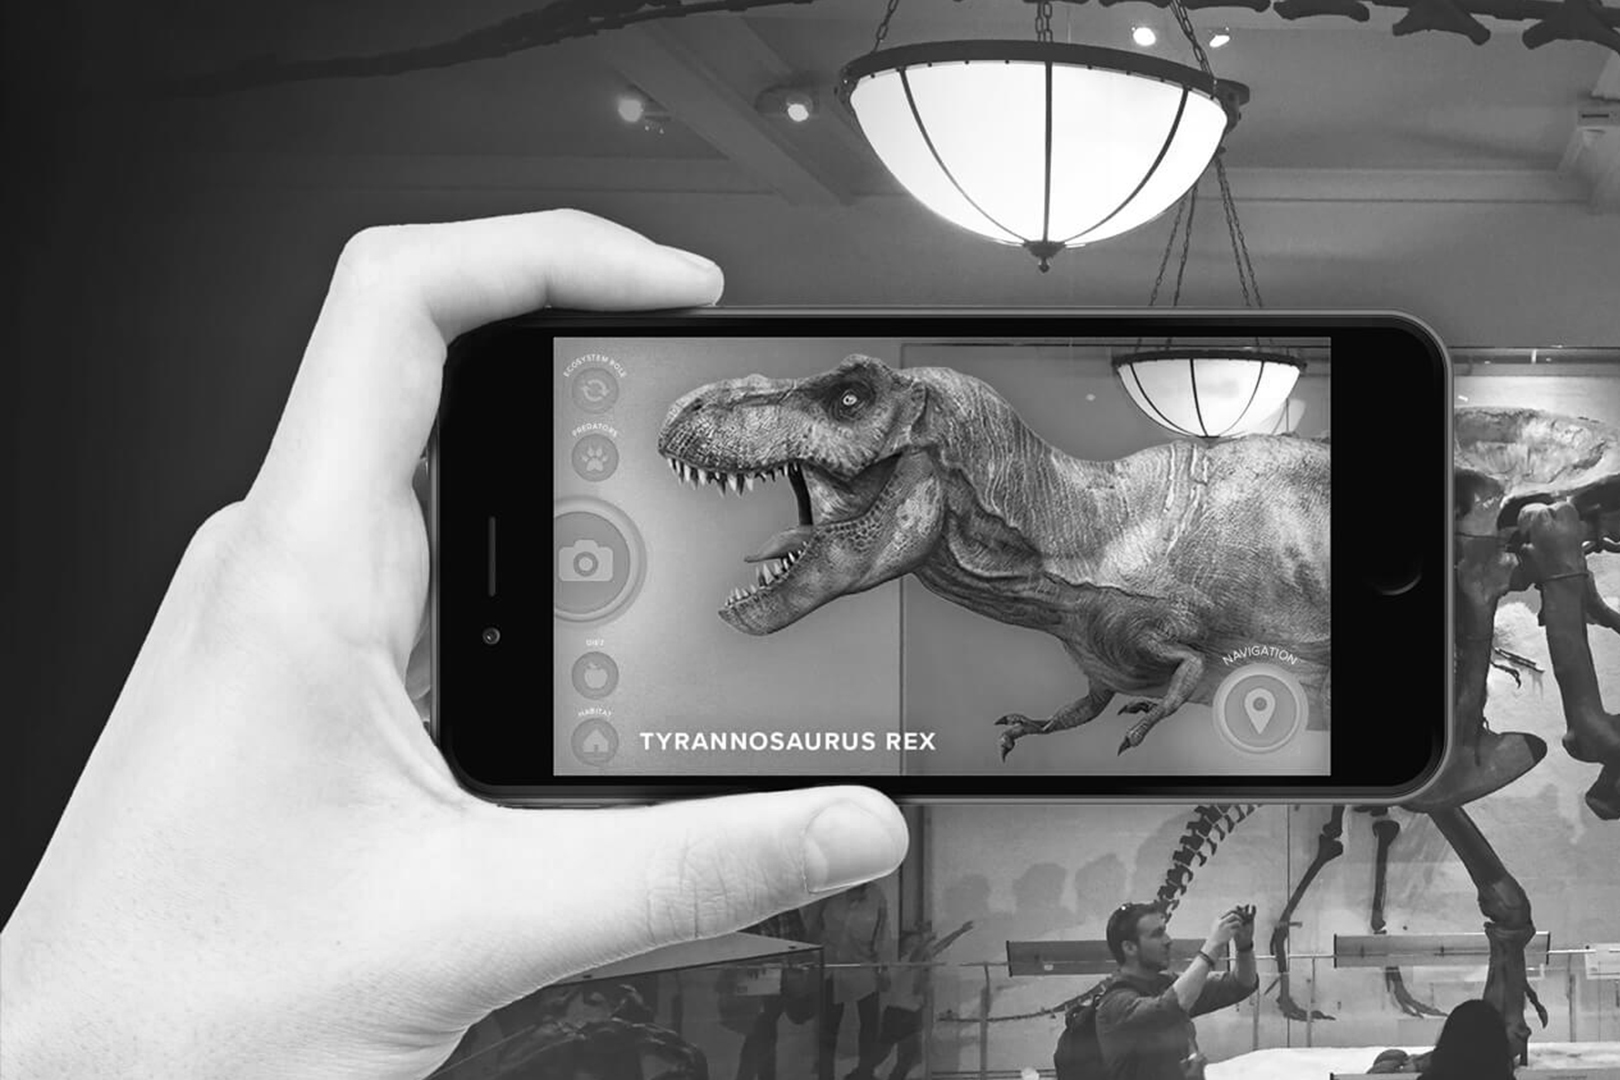 Augmented reality brings alive a dinosaur